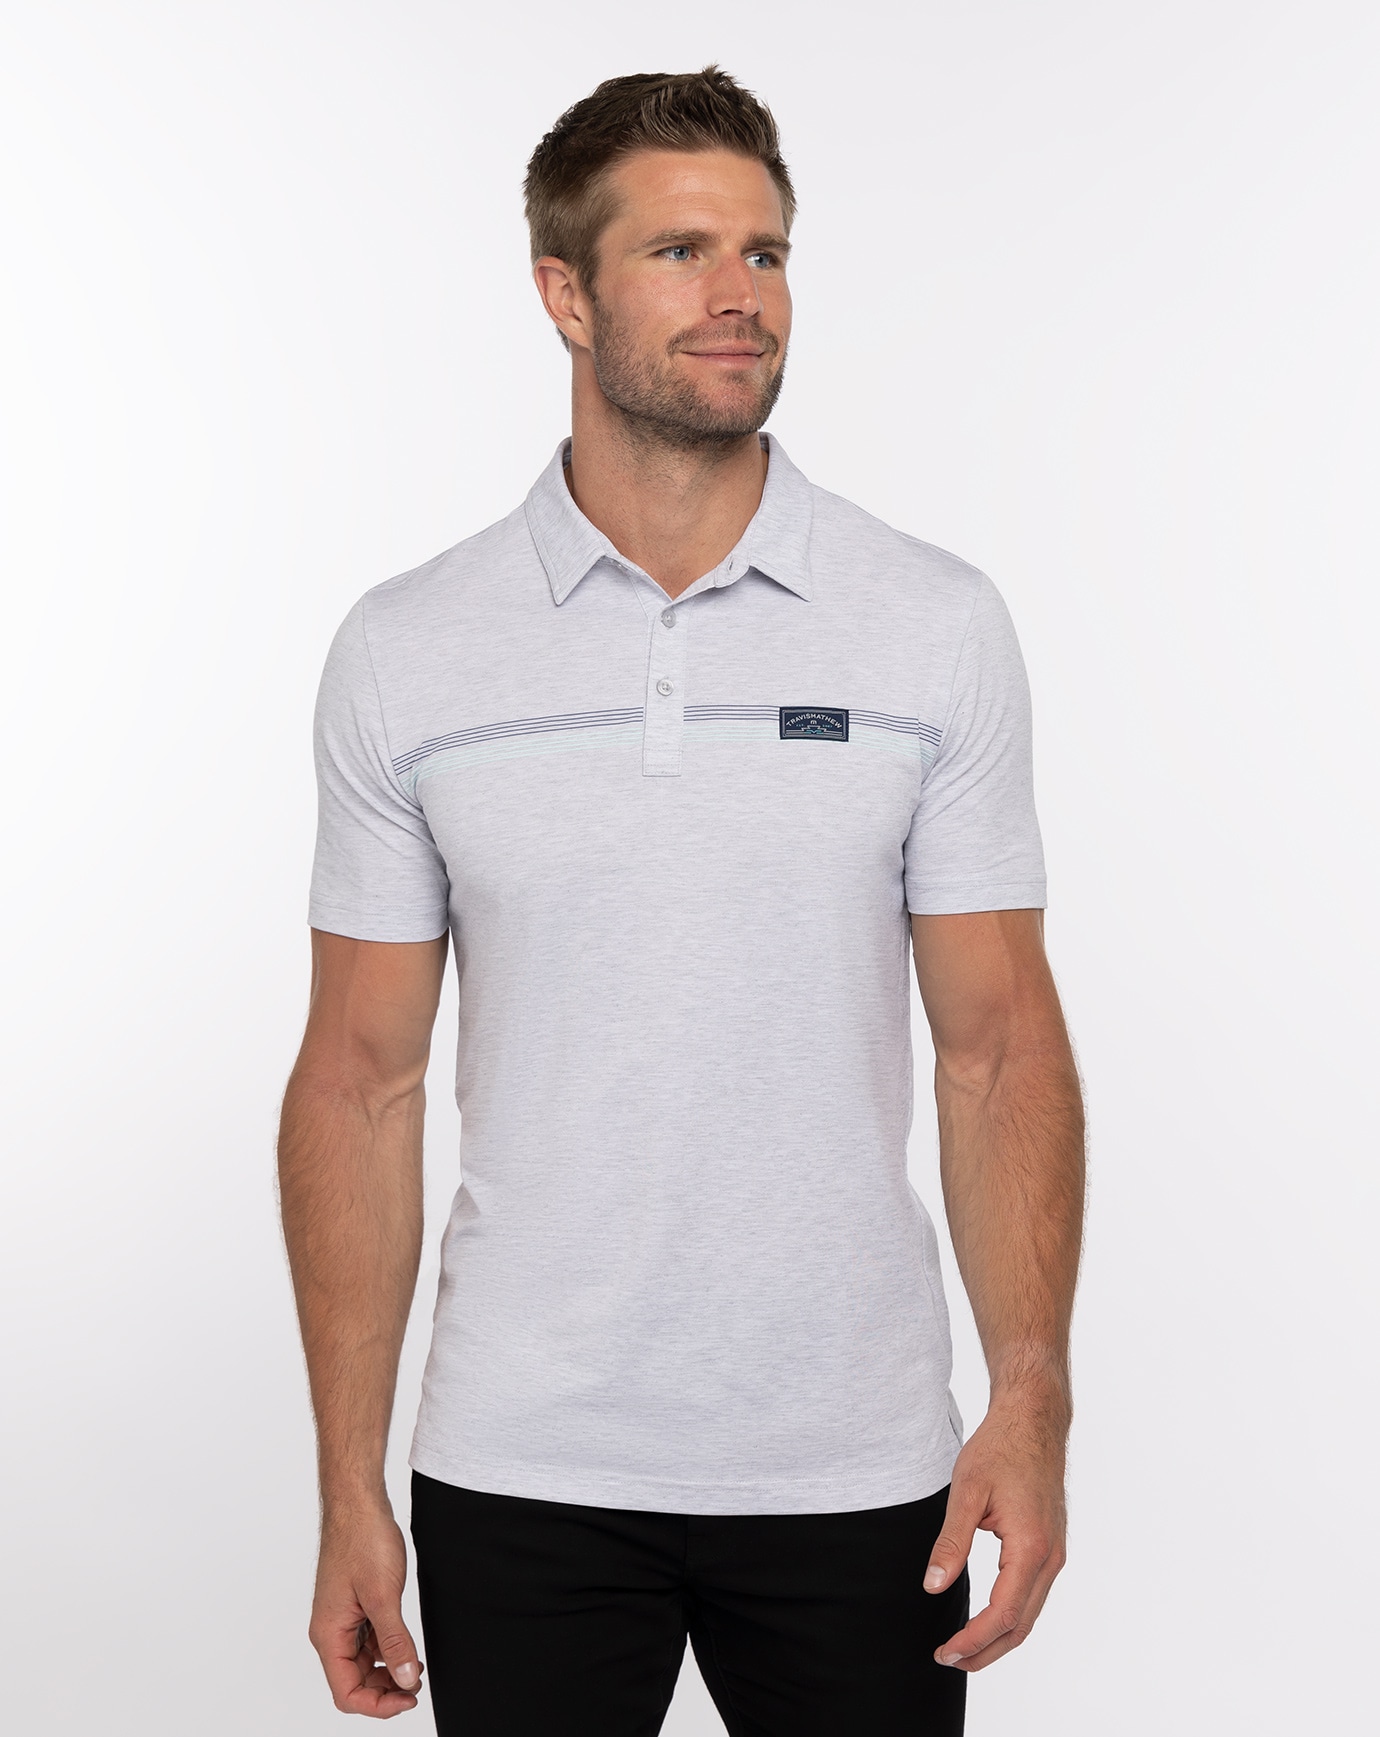 Related Product - NEOTROPICAL POLO